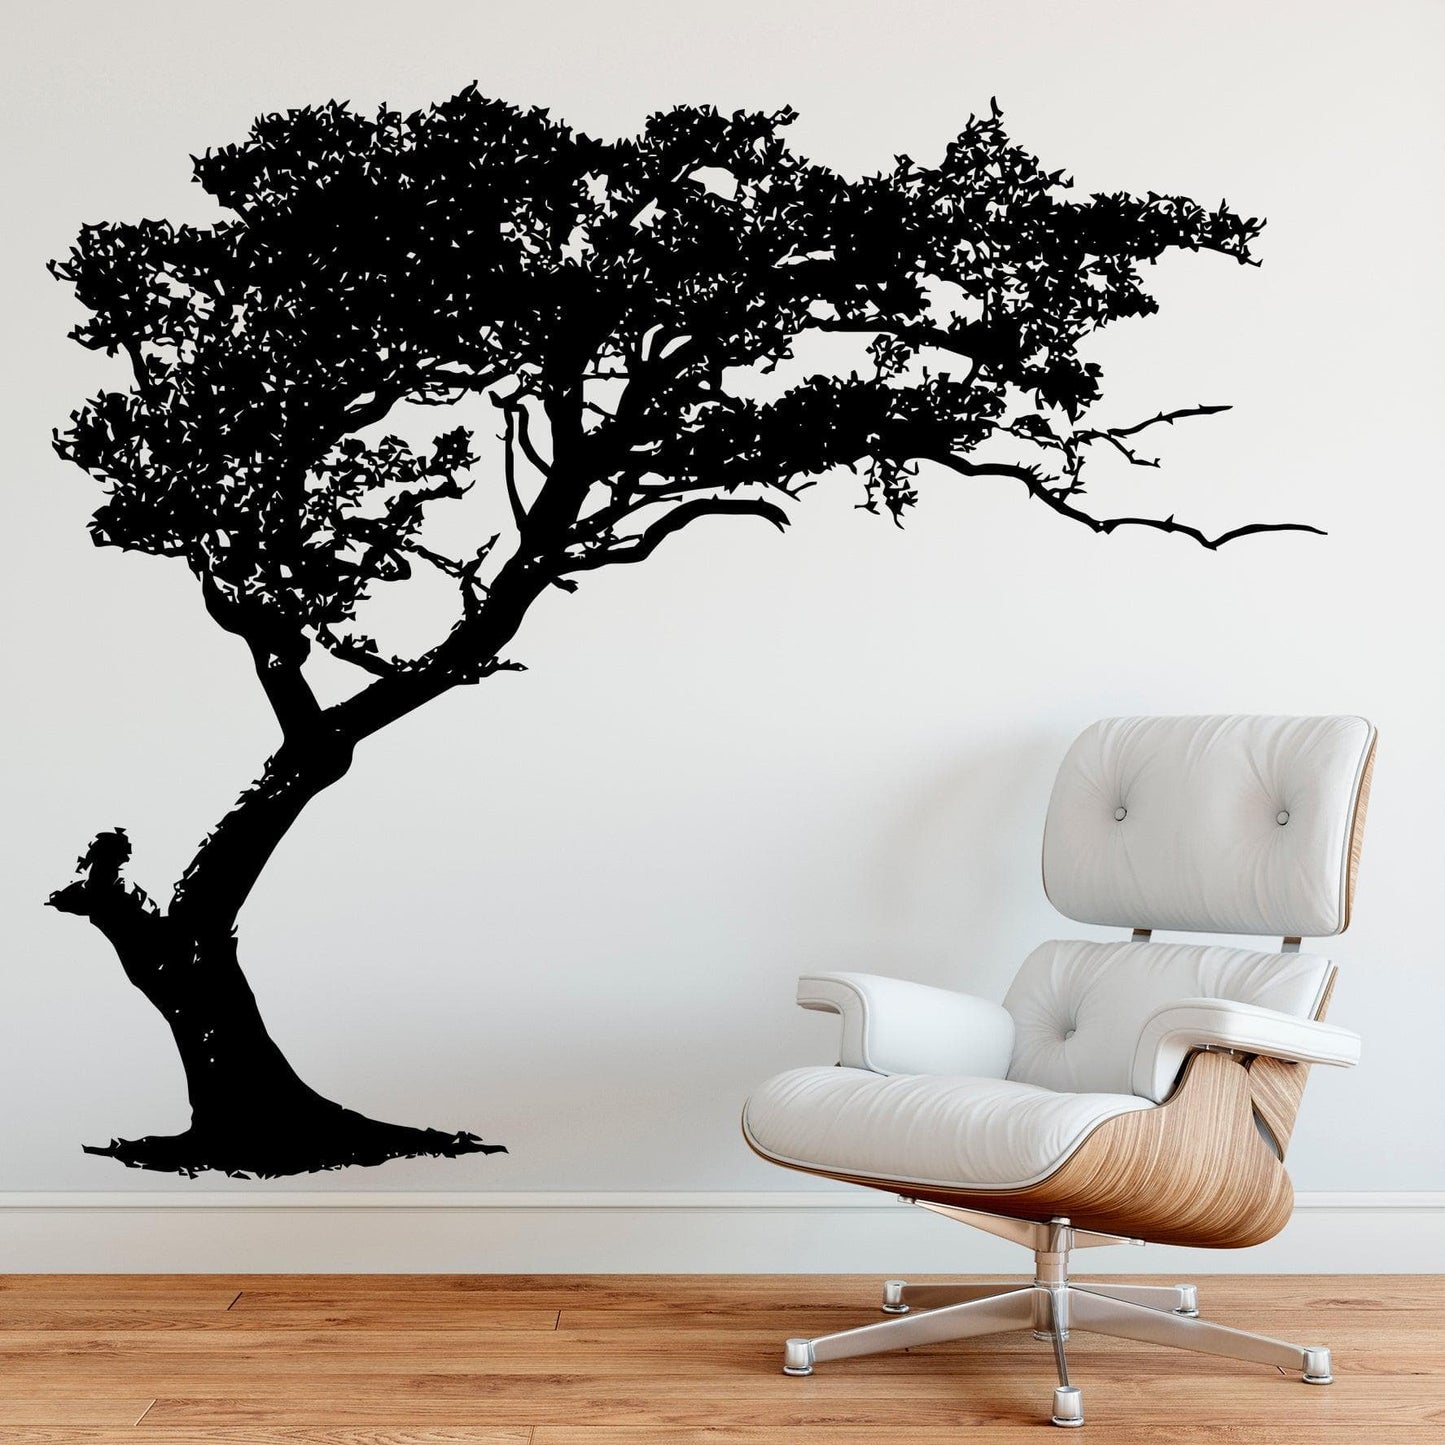 Black tree decal on a white wall next to a white chair.